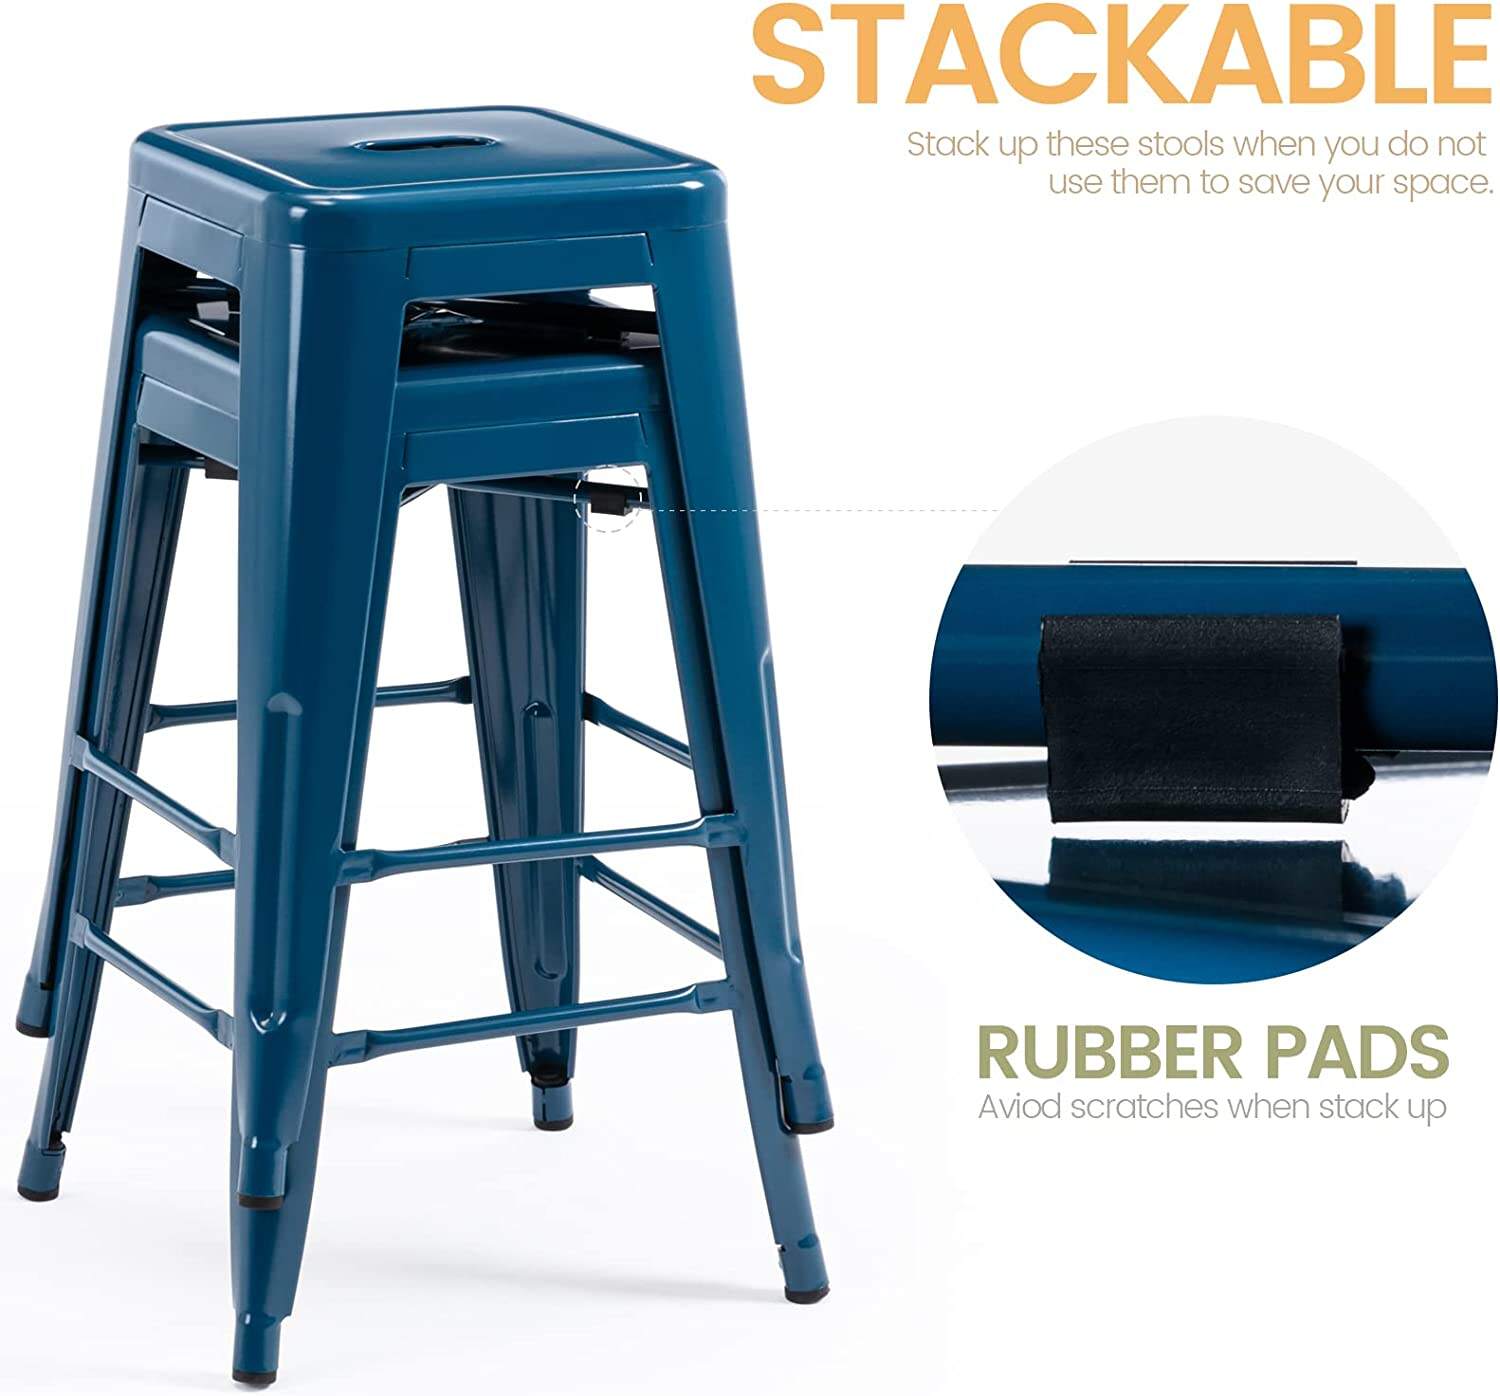 24 Inch Metal Bar stools. Backless Counter Height Barstools. Indoor Outdoor Stackable Stools with Square Seat